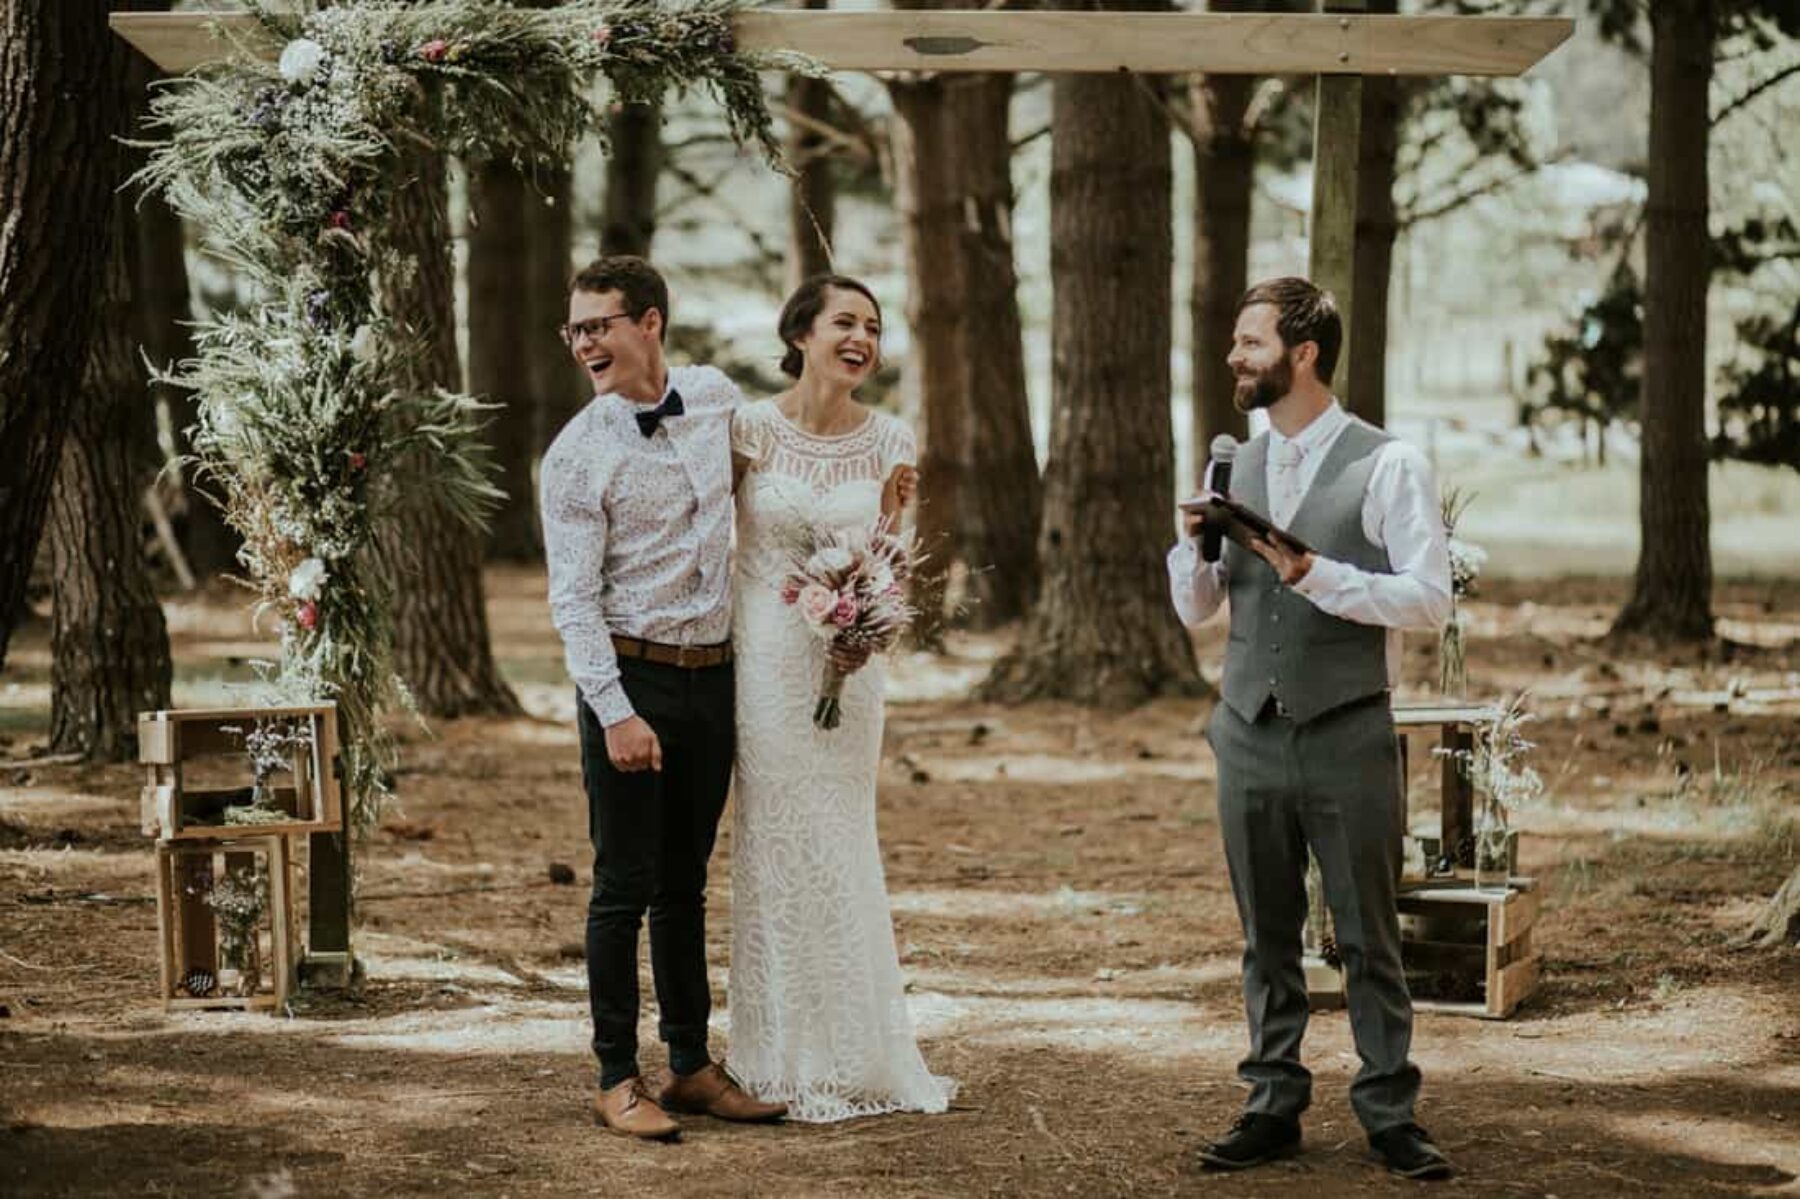 DIY forest wedding in Waimauku NZ - photography by Amy Kate